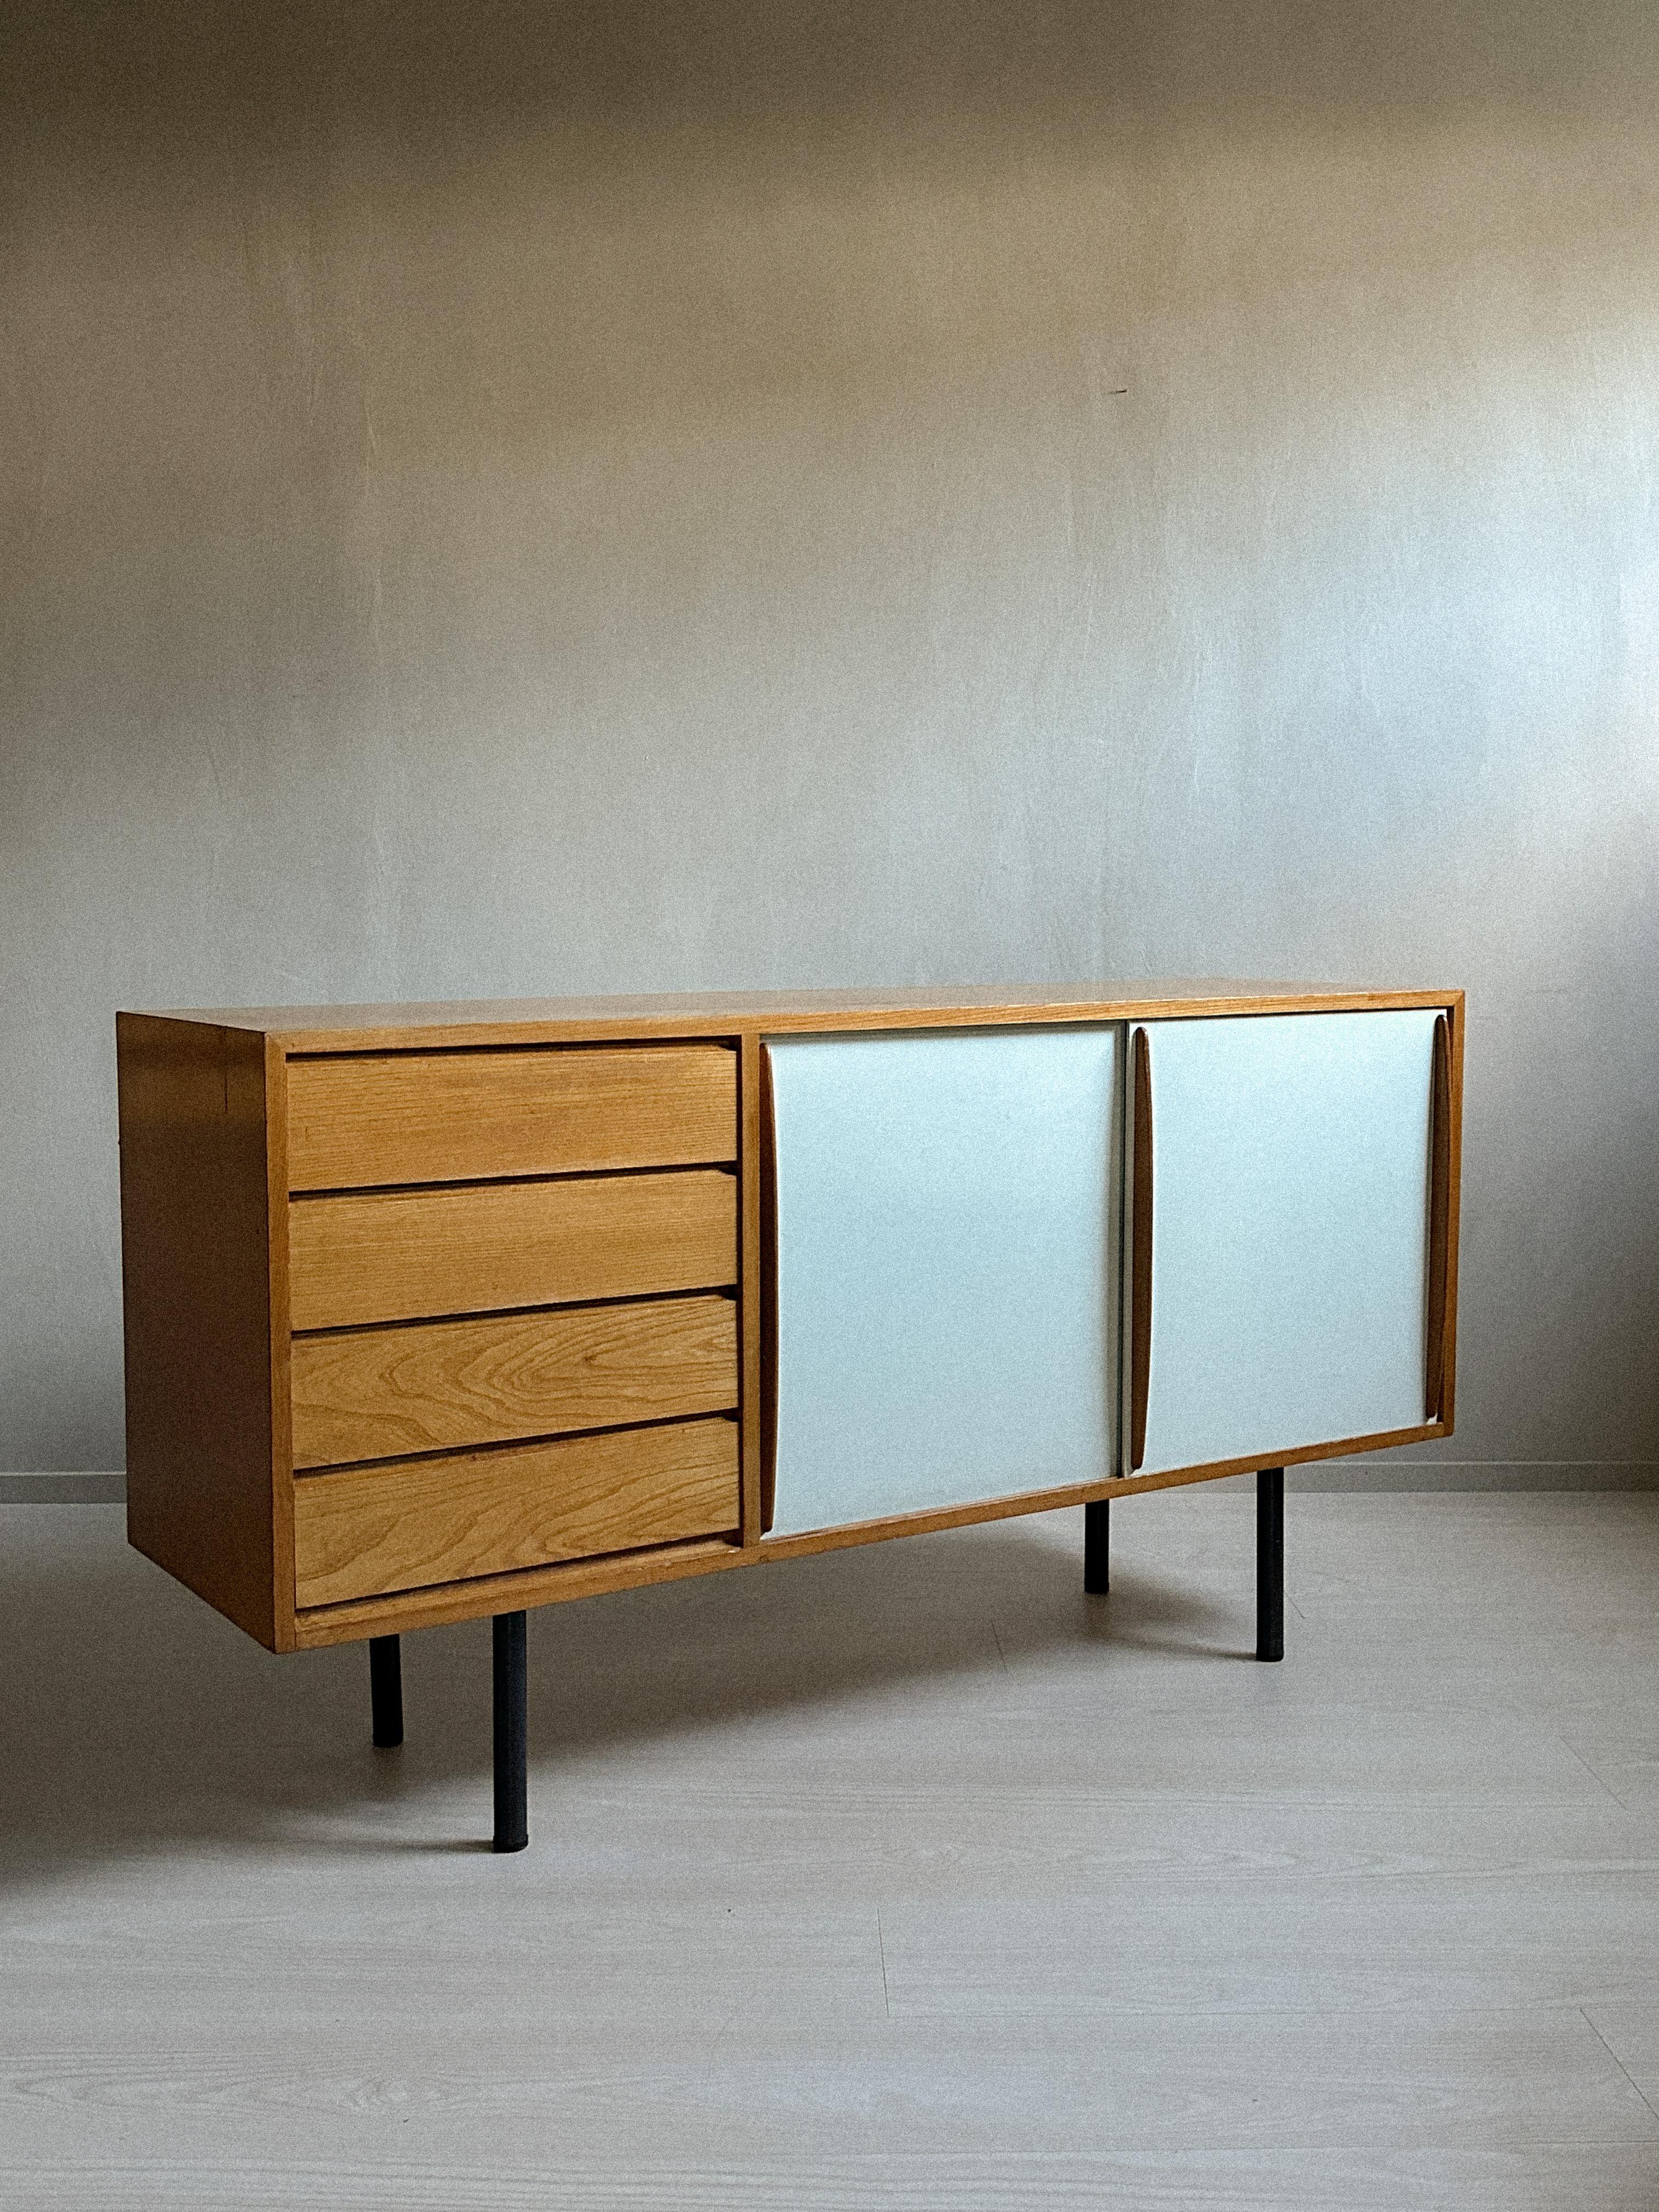 A wonderful sideboard by Finish designer Olli Borg. Model 4004 for Asko, Finland c. 1950s. A set of 4 drawers, 2 sliding doors and shelving interior, metal legs. Length 150 cm, depth 43 cm, height 80 cm. 

Wear consistent with age and use. 